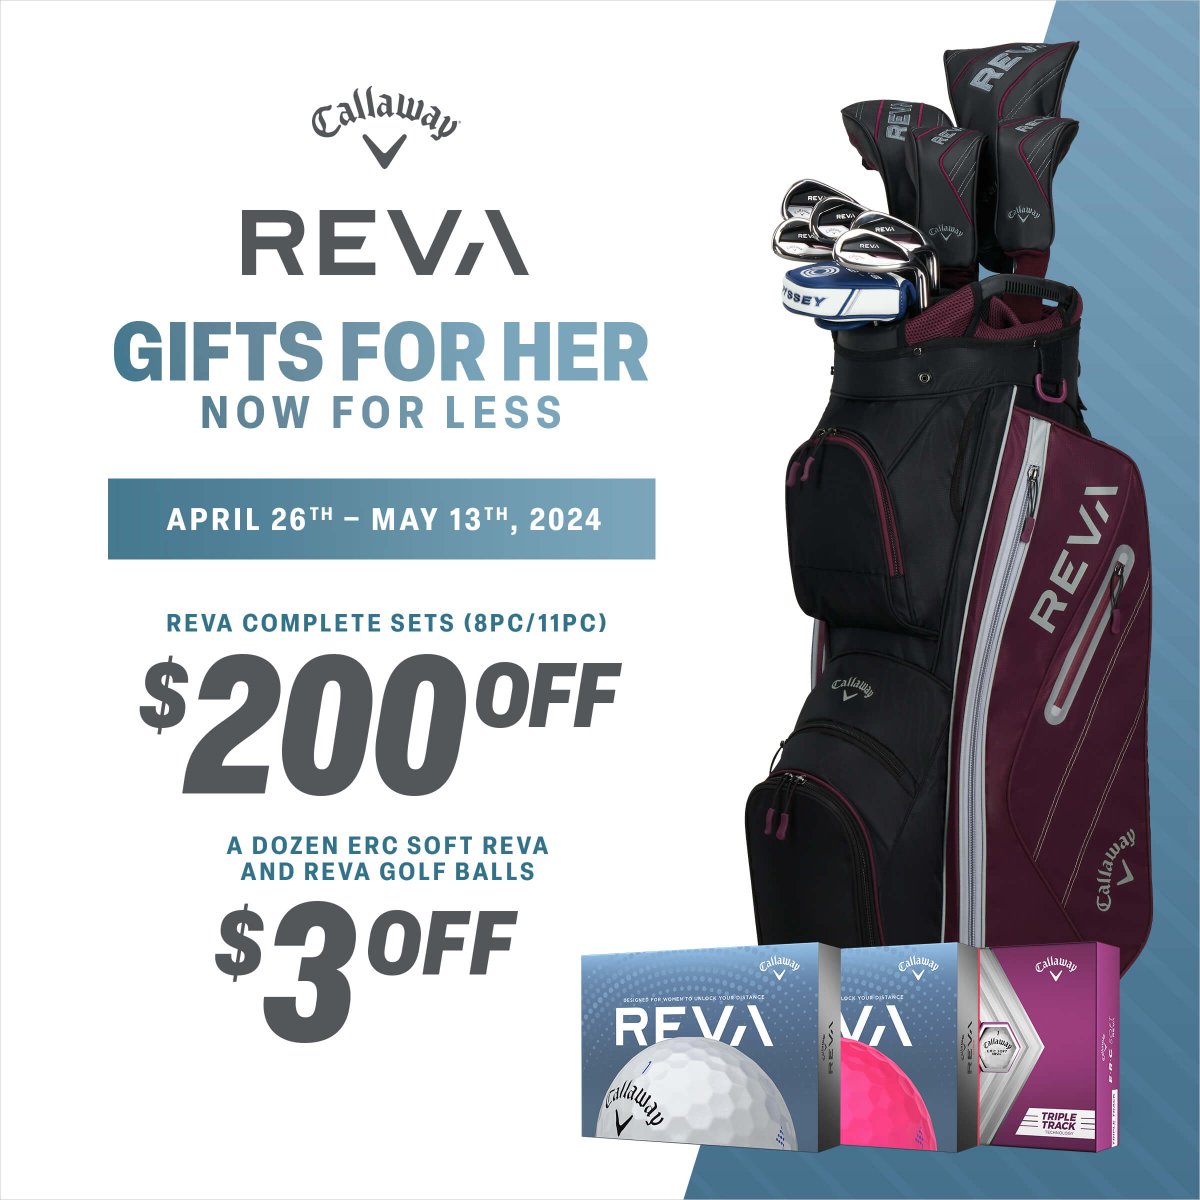 Mother's Day Special - A Gift for Her... In stock in the now in the Pro Shop! #mothersdaygift #giftforher #callaway #yycgolf #ladiesgolf #inglewoodgcc